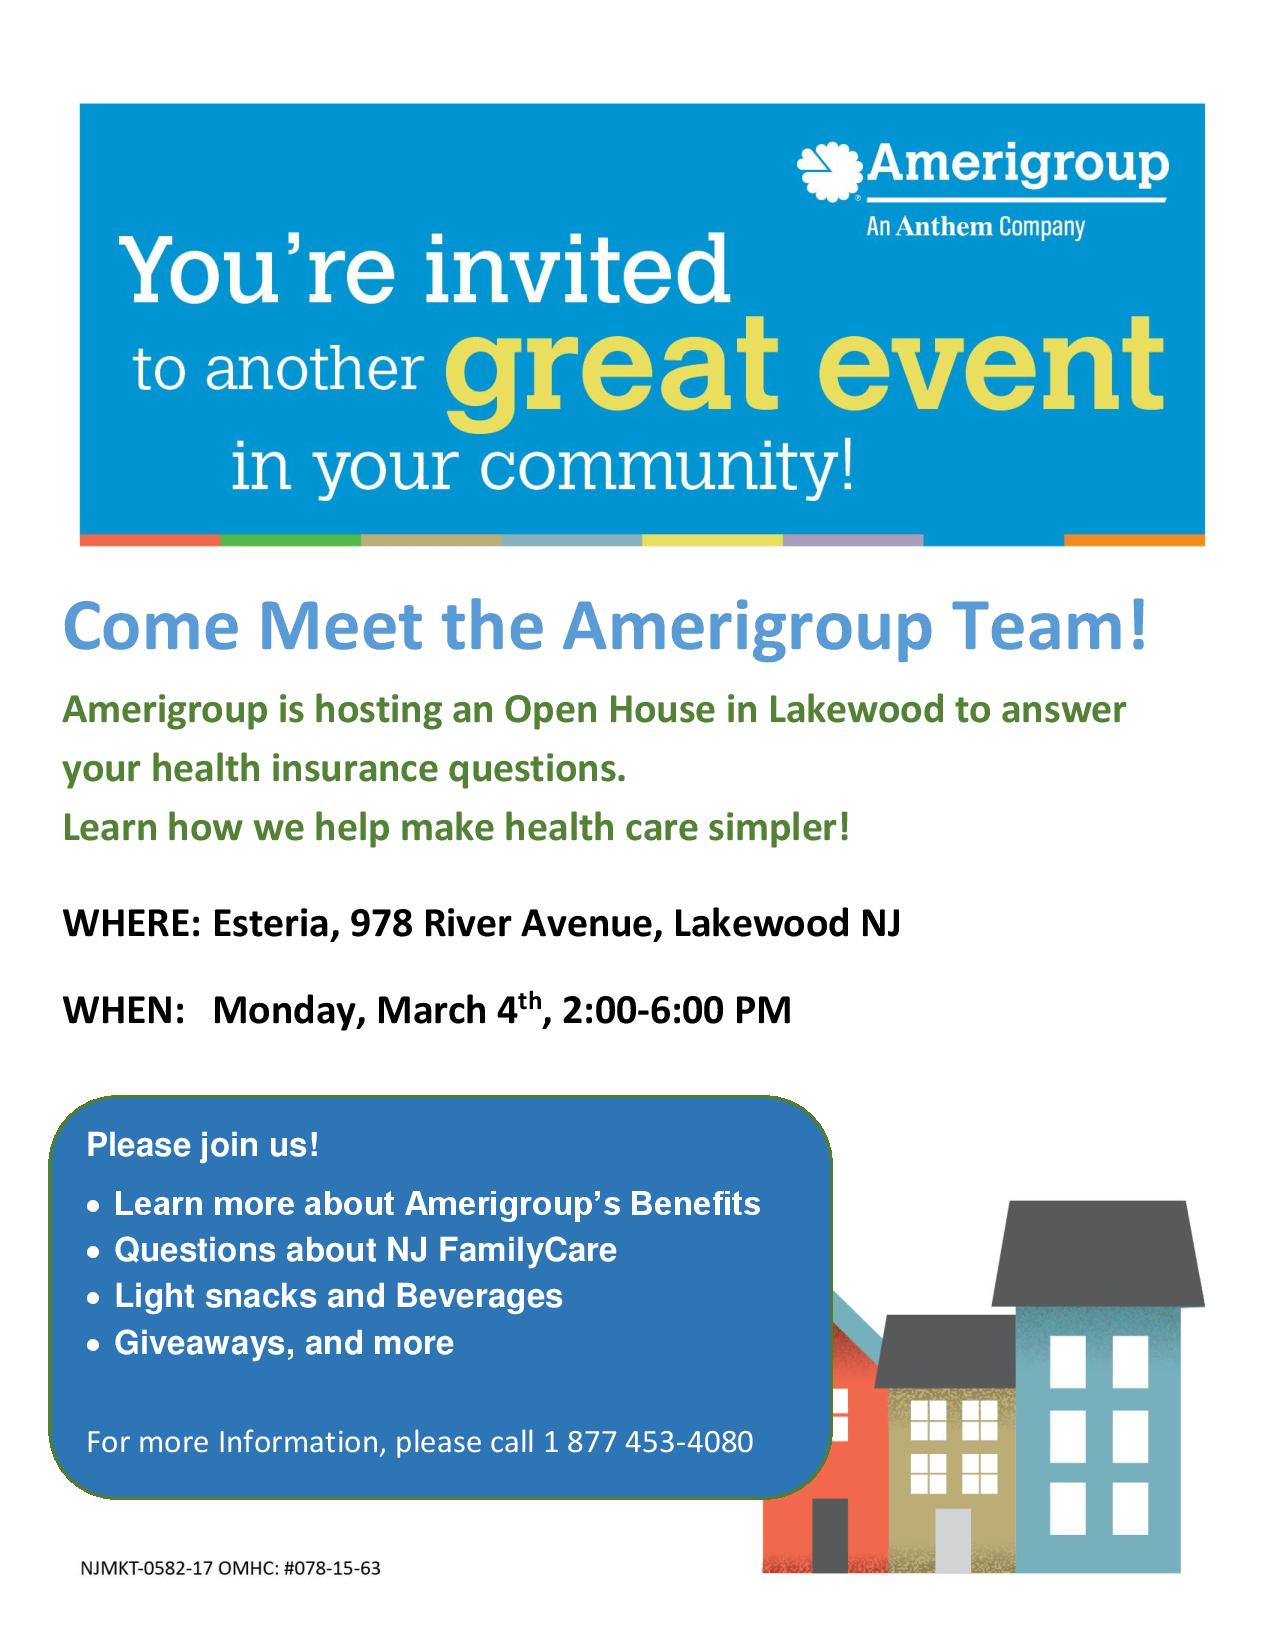 Amerigroup Executives Will Be In Lakewood Monday The Lakewood Scoop